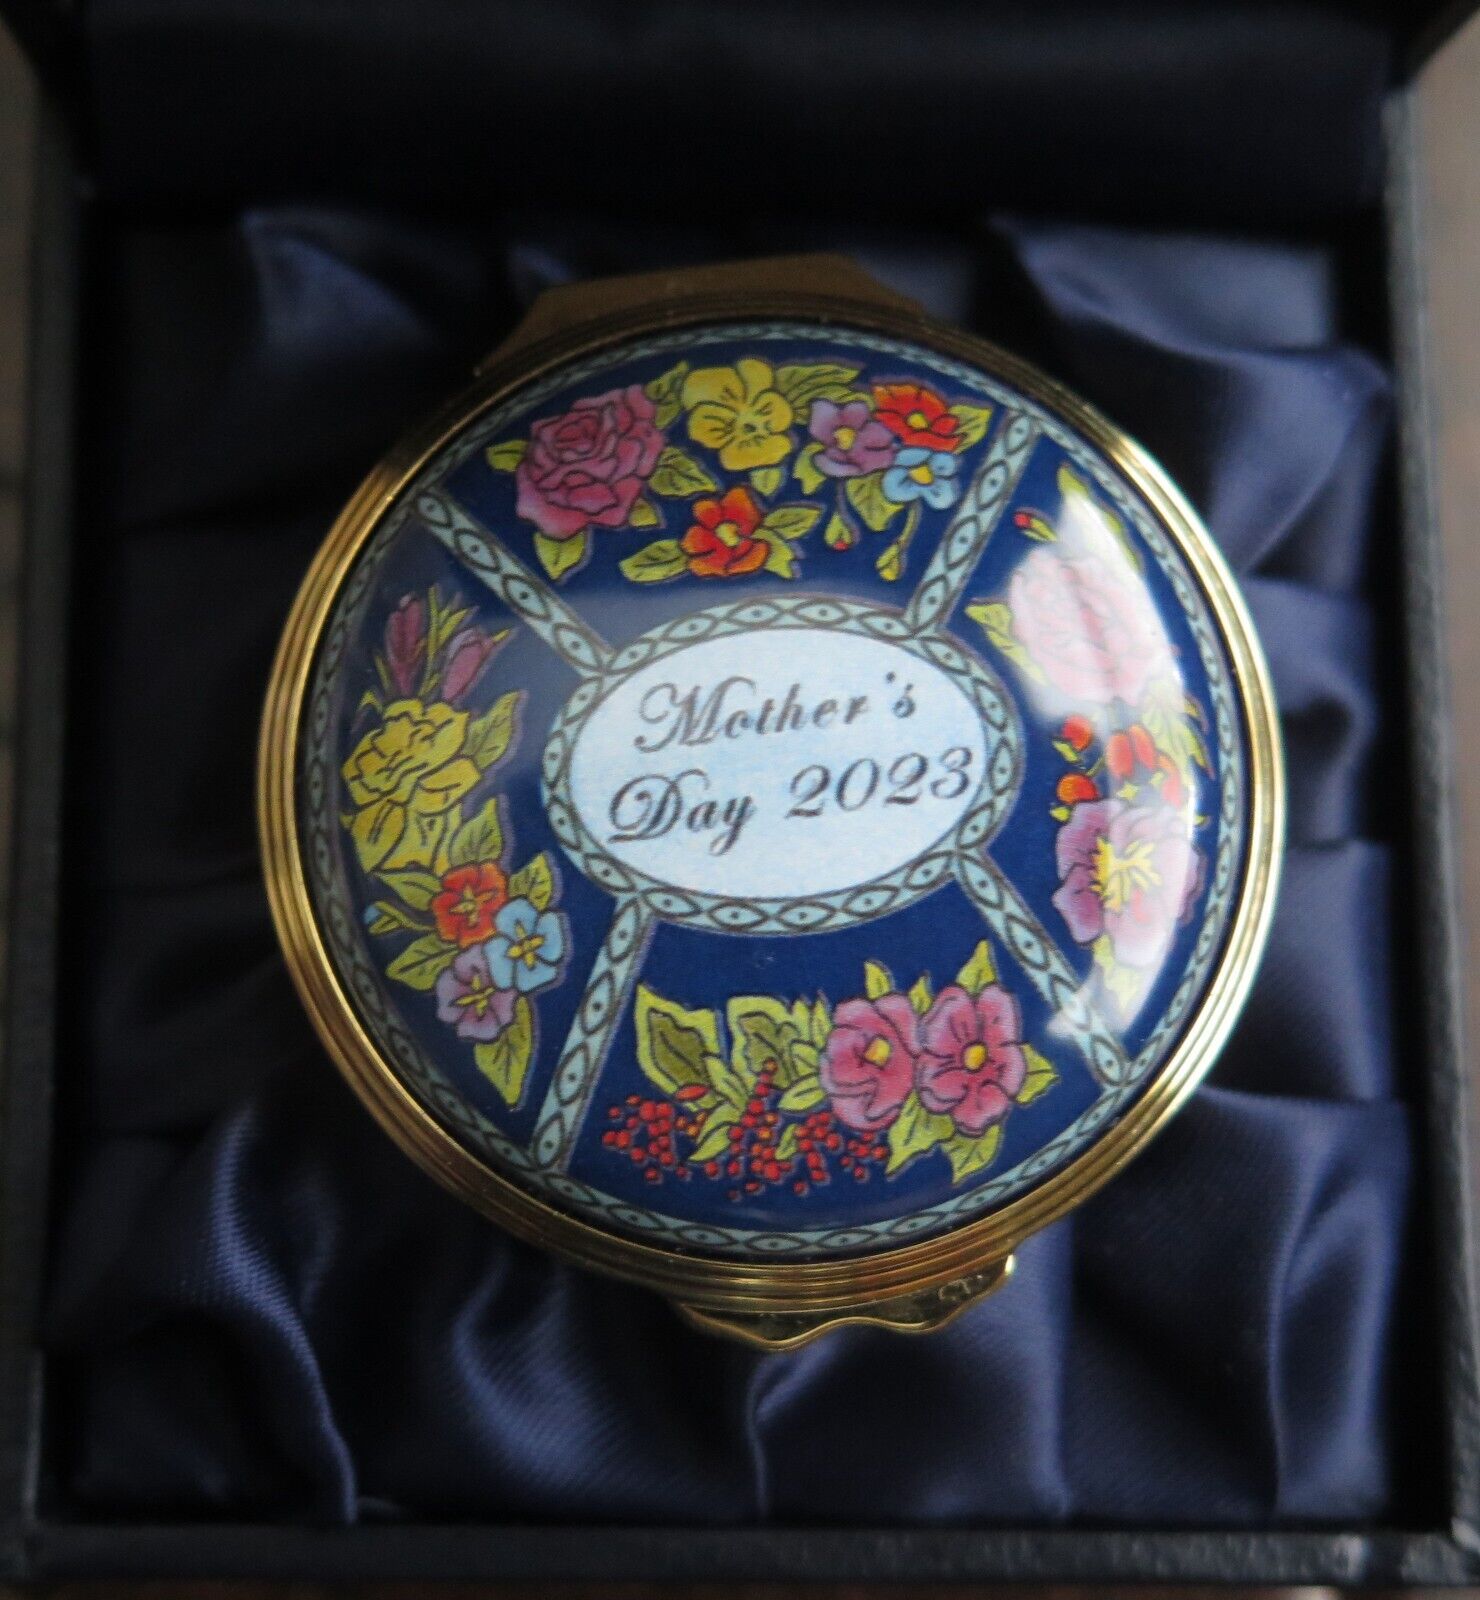 New HALCYON DAYS Enameled onto Copper England Mother\'s Day 2023 Trinket Box $345